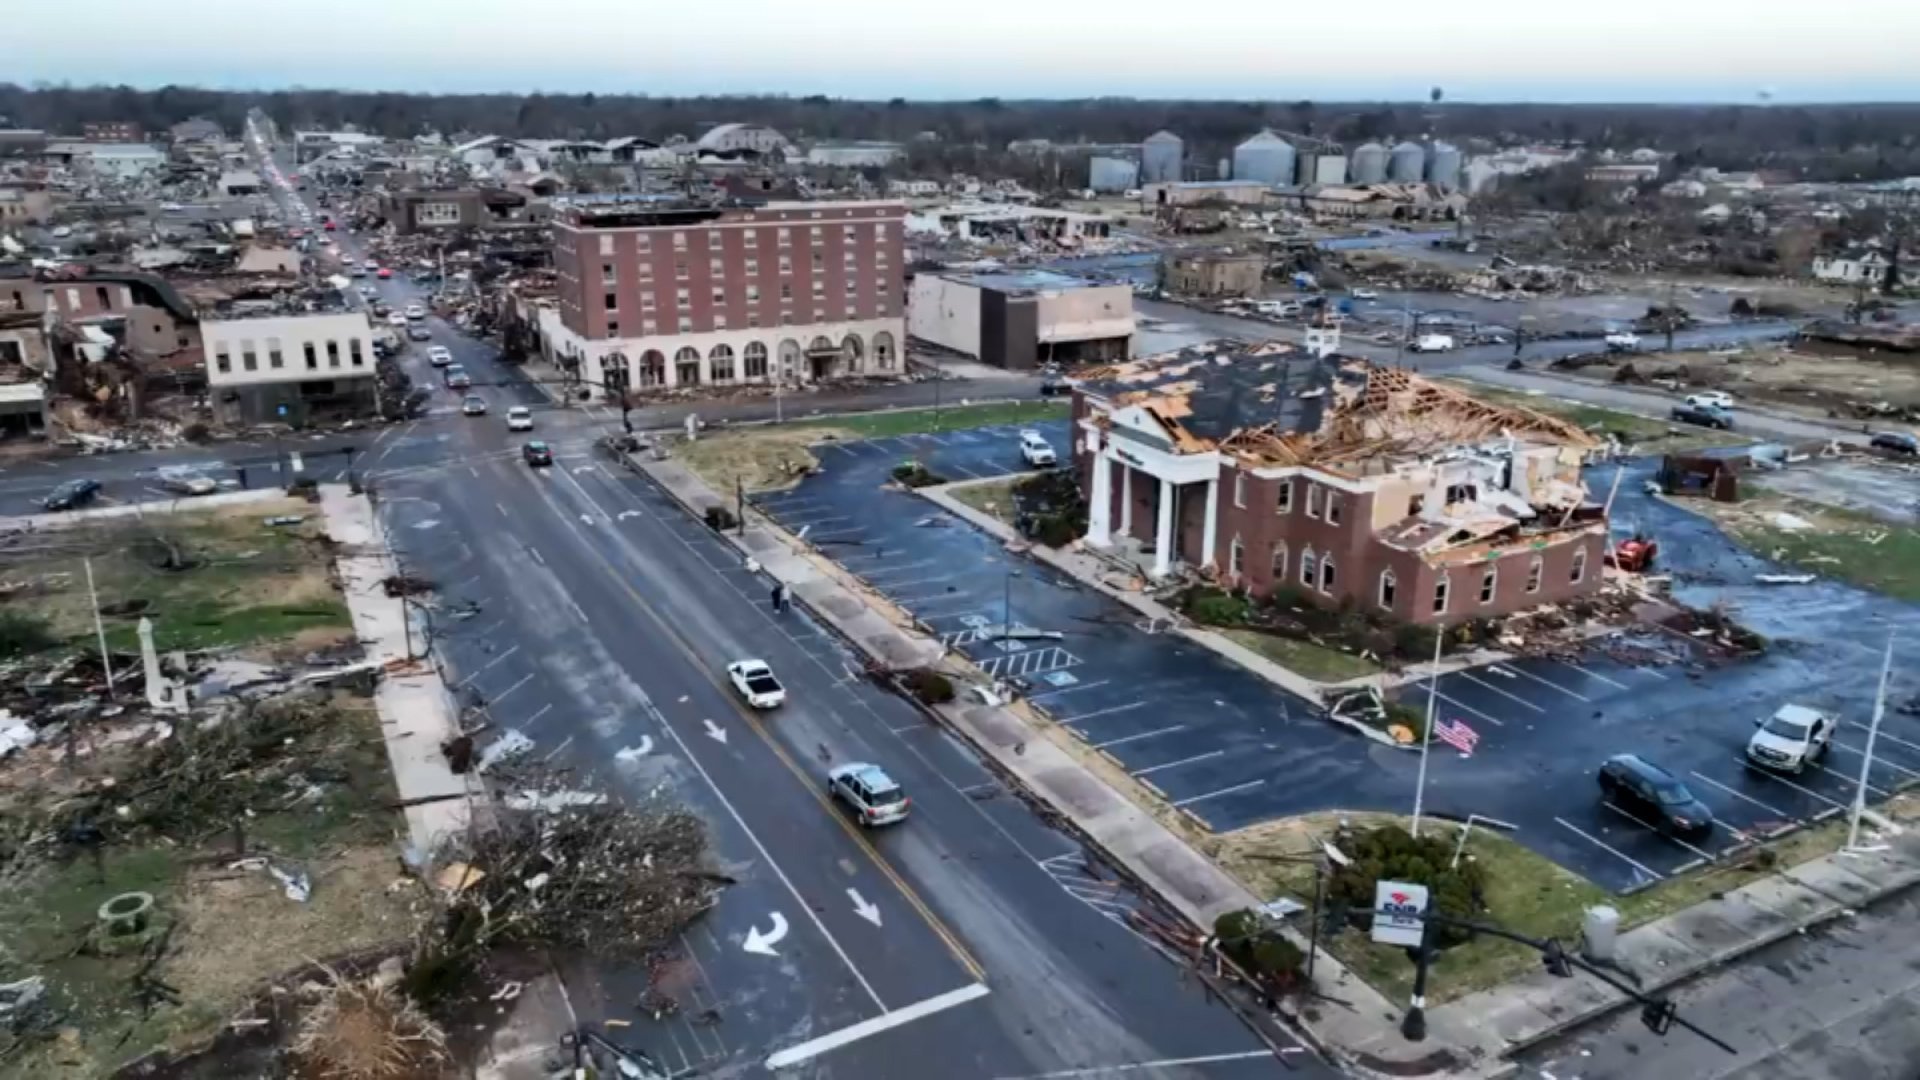 This image shows what remains of downtown Mayfield, Kentucky, following a night of inclement weather in the area.